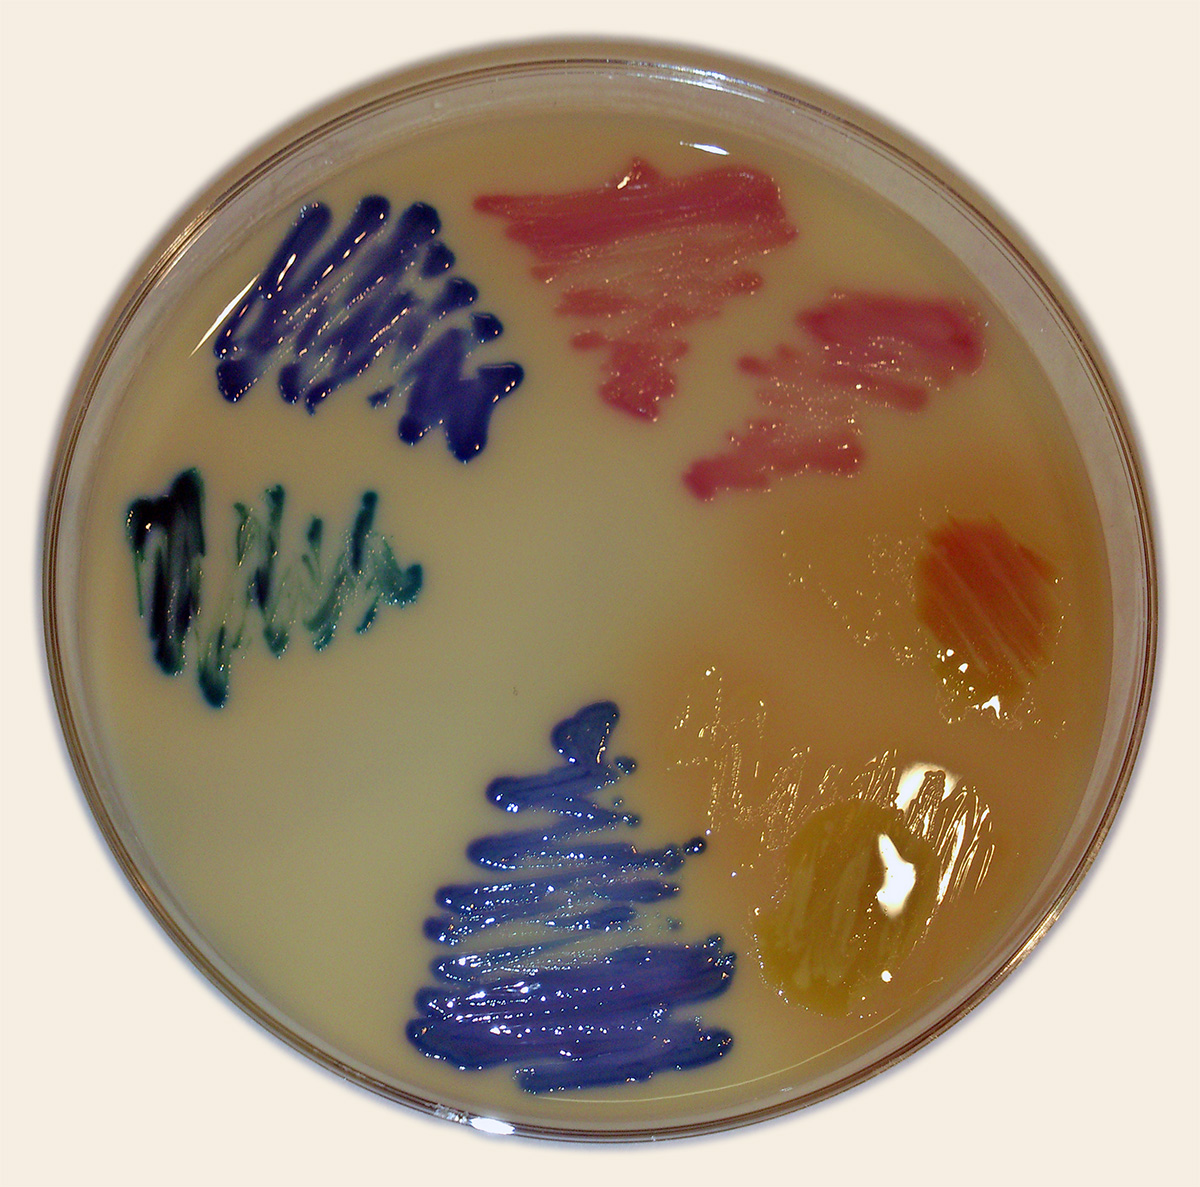 UTI Agar is a chromogenic medium for identification and differentiation of main microorganisms that cause urinary tract infections (UTIs). On the agar plate you can see the following colonies: Pink - E. coli; Blue-green/turquoise - Enterococcus spp.; Dark blue - Klebsiella spp.; Light brown with a red dot - Proteus mirabilis; Light brown - Proteus spp.